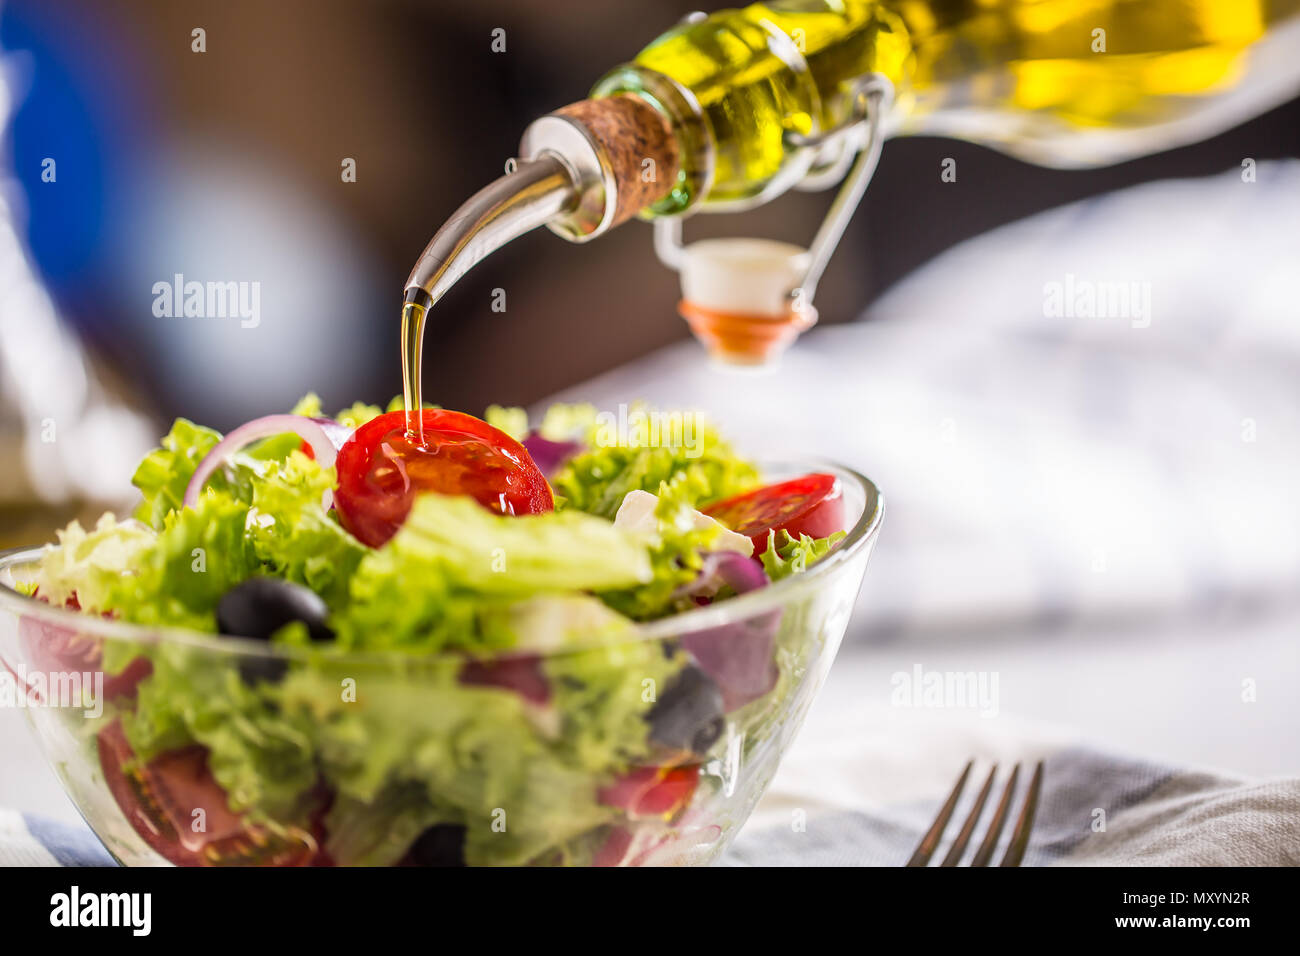 Olive oil pouring into bowl of fresh vegetable salad. Stock Photo